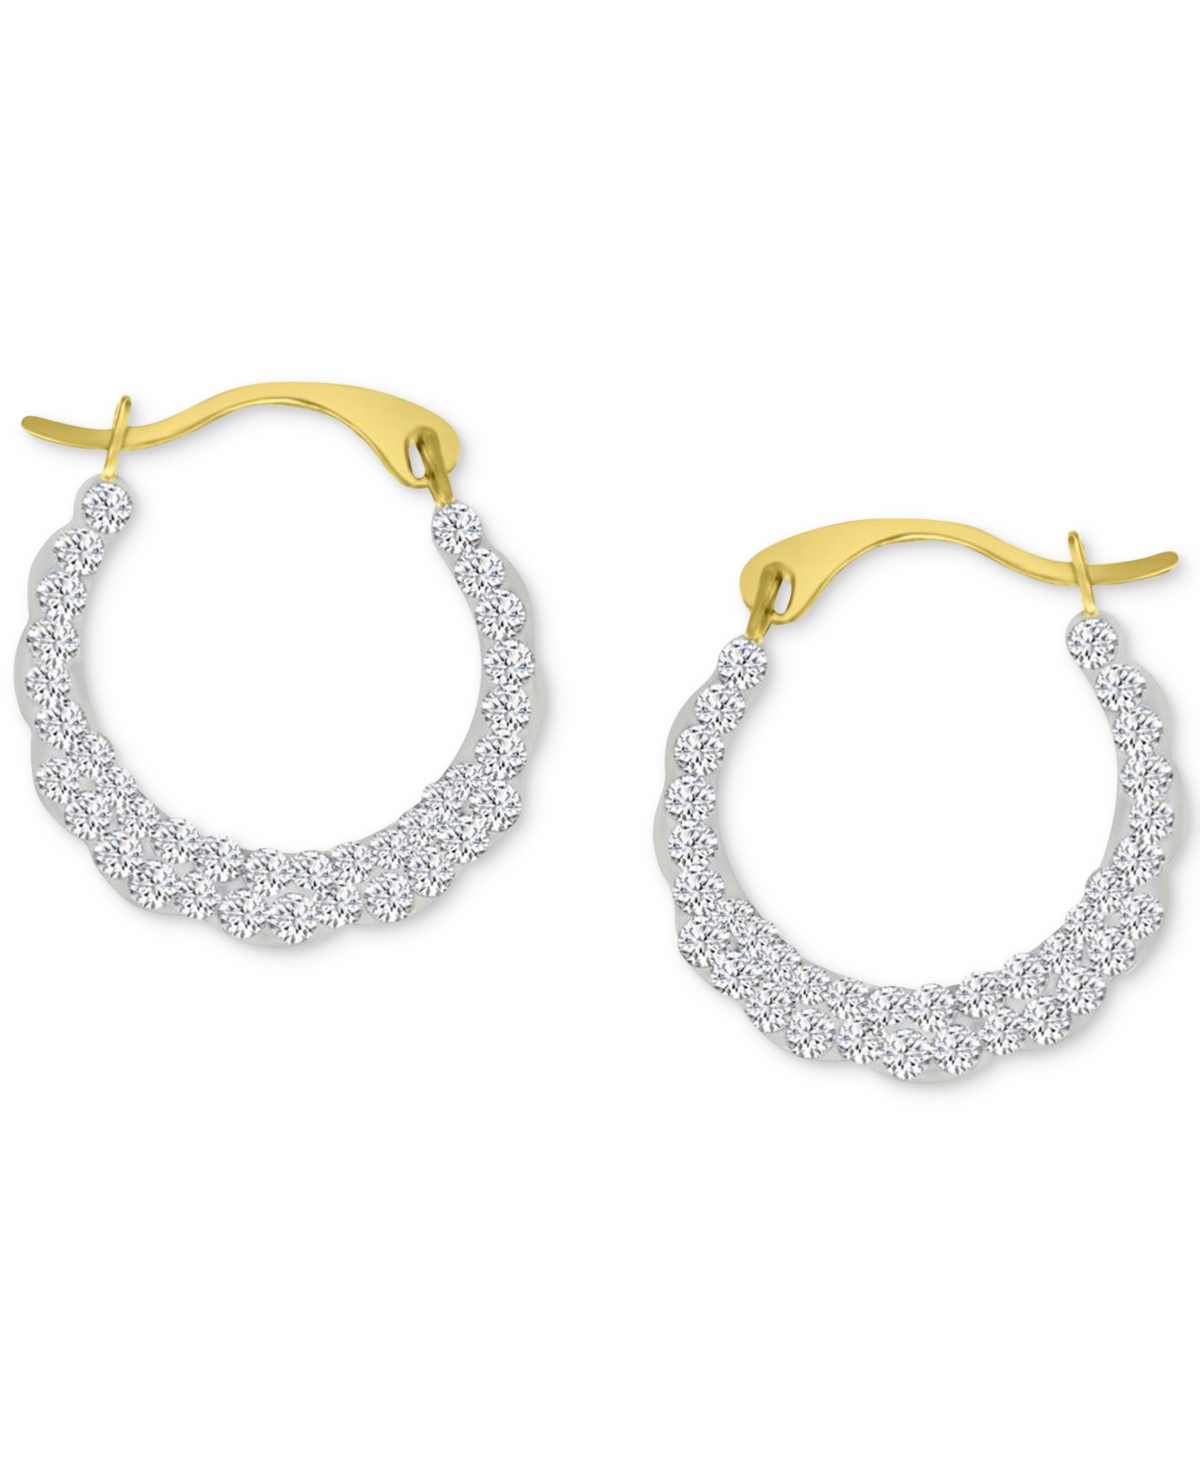 Crystal Pave Scallop Edge Small Hoop Earrings in 10k Gold, 0.59" - Gold